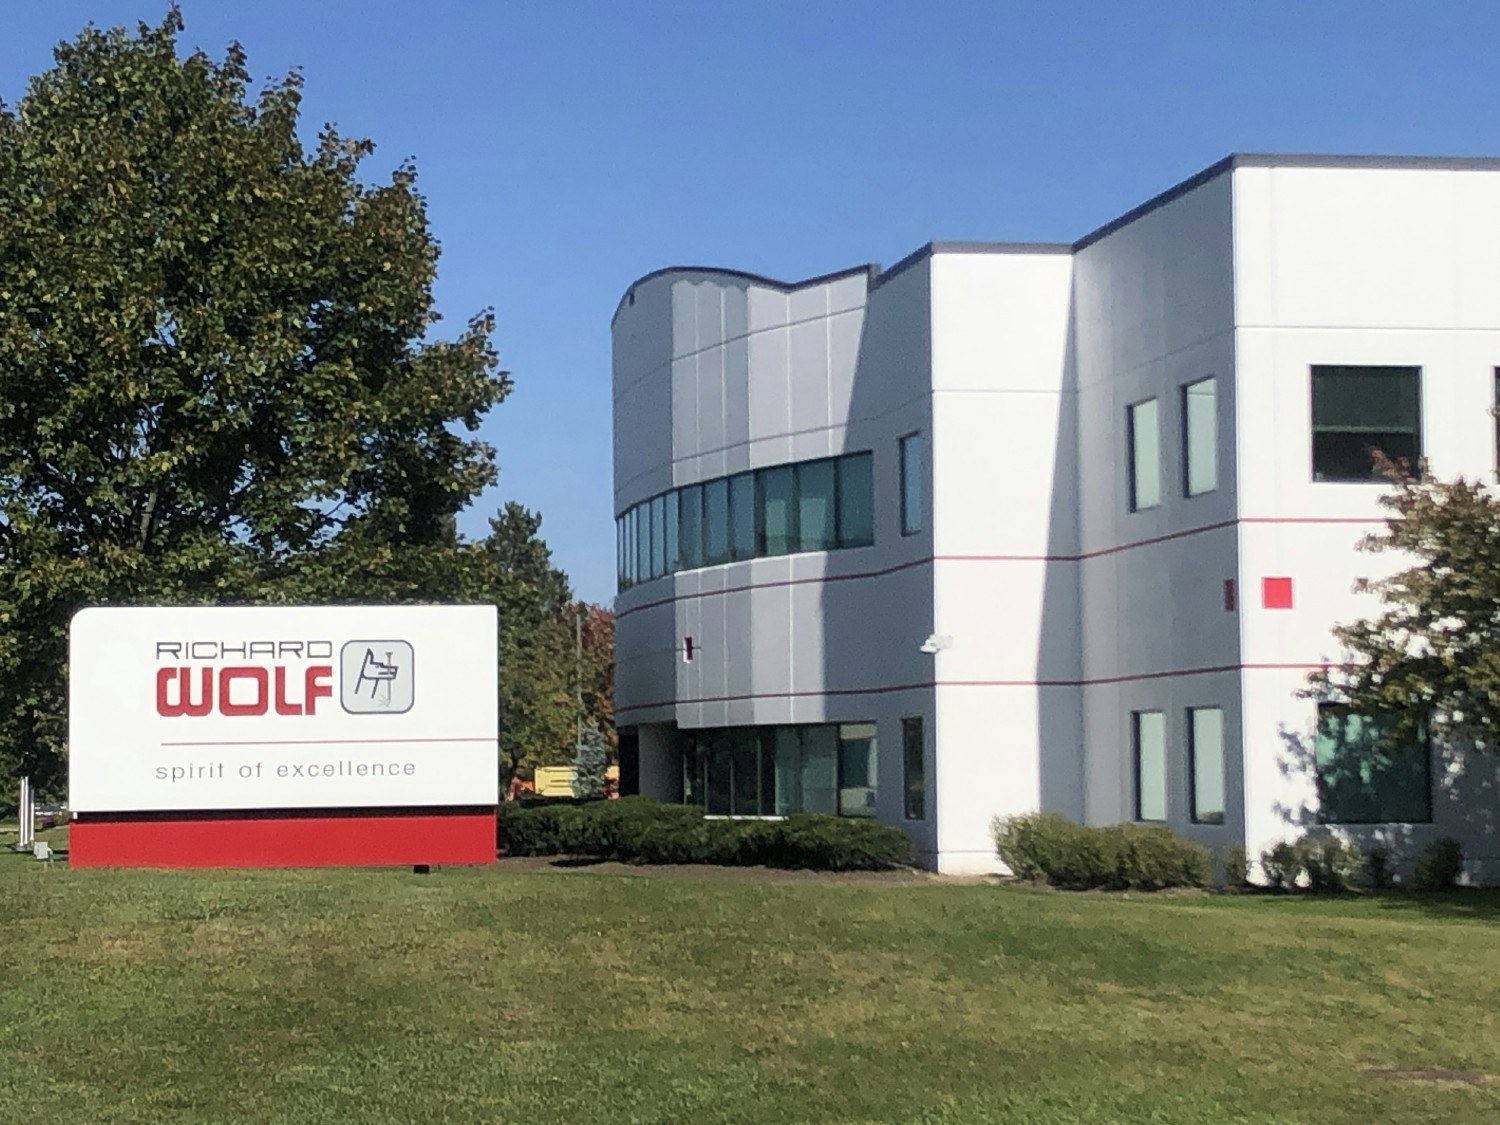 Our Vernon Hills, IL HQ houses manufacturing, sales, marketing, quality, and admin teams, as well as a training center.